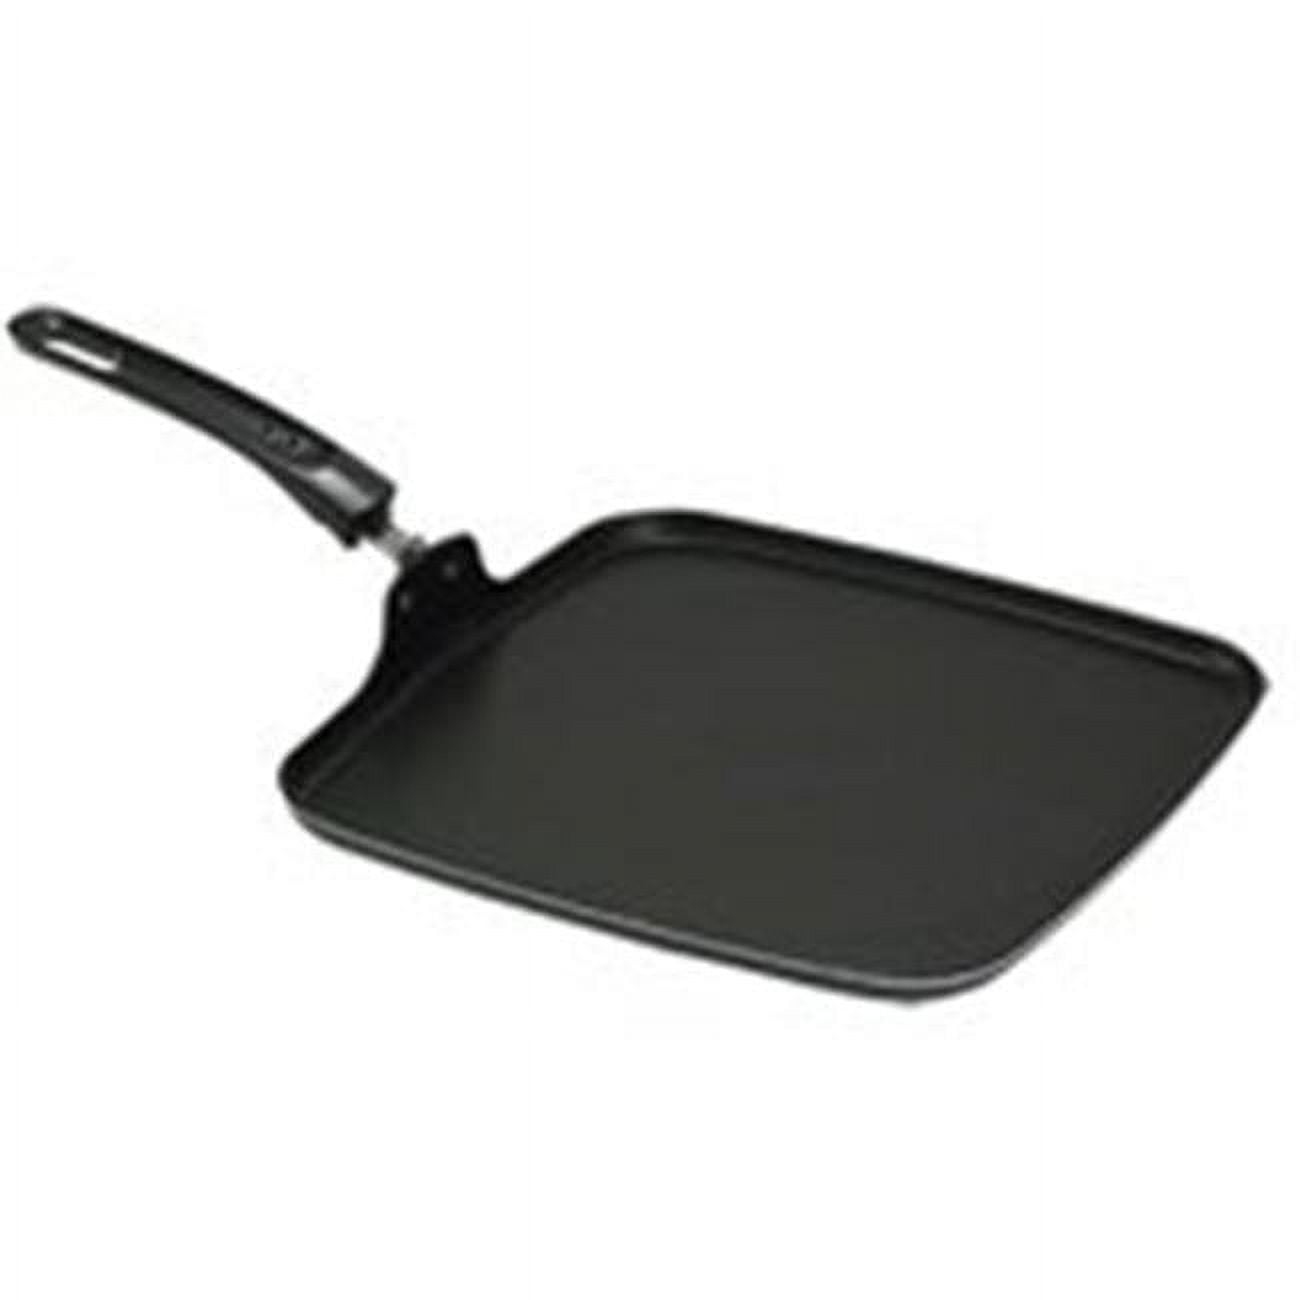 T-Fal Specialty Nonstick 10.25 inch Grilled Cheese Griddle